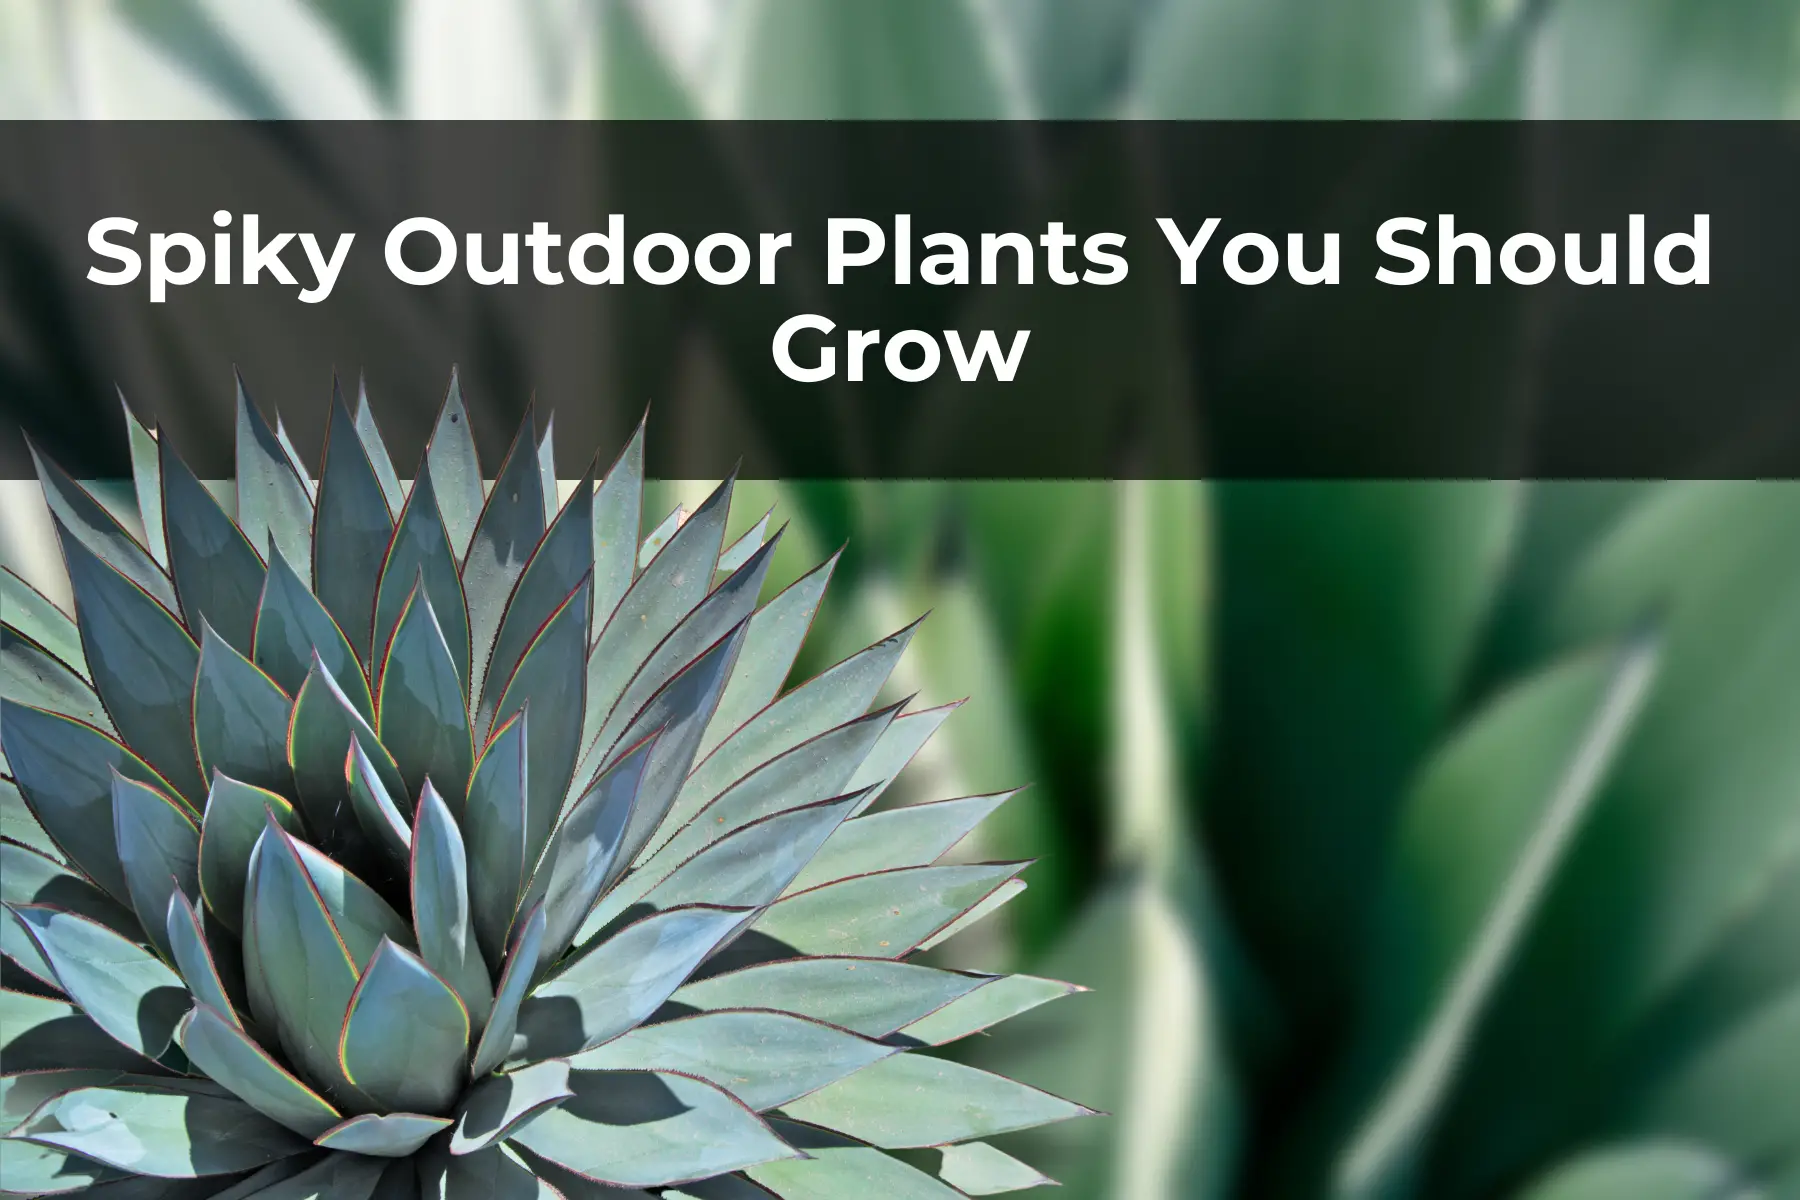 Spiky Outdoor Plants You Should Grow